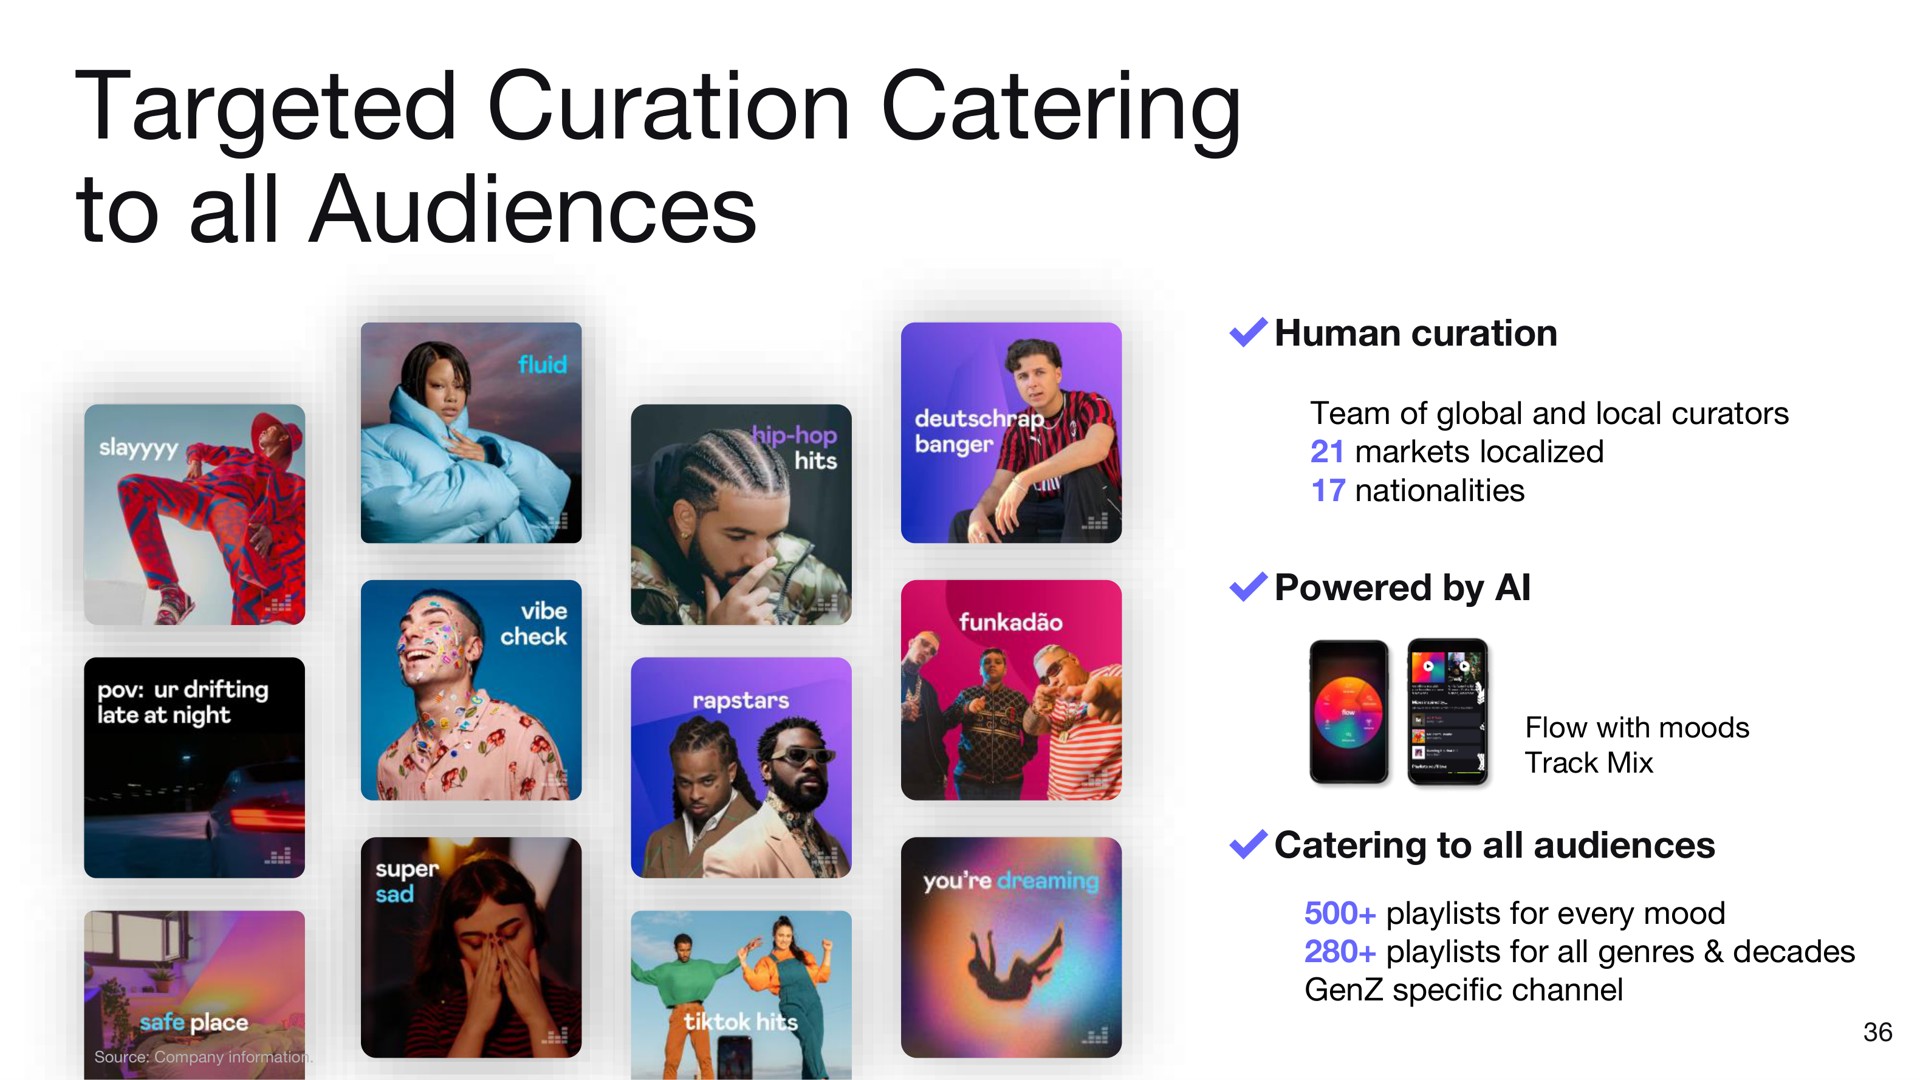 targeted curation catering to all audiences | Deezer